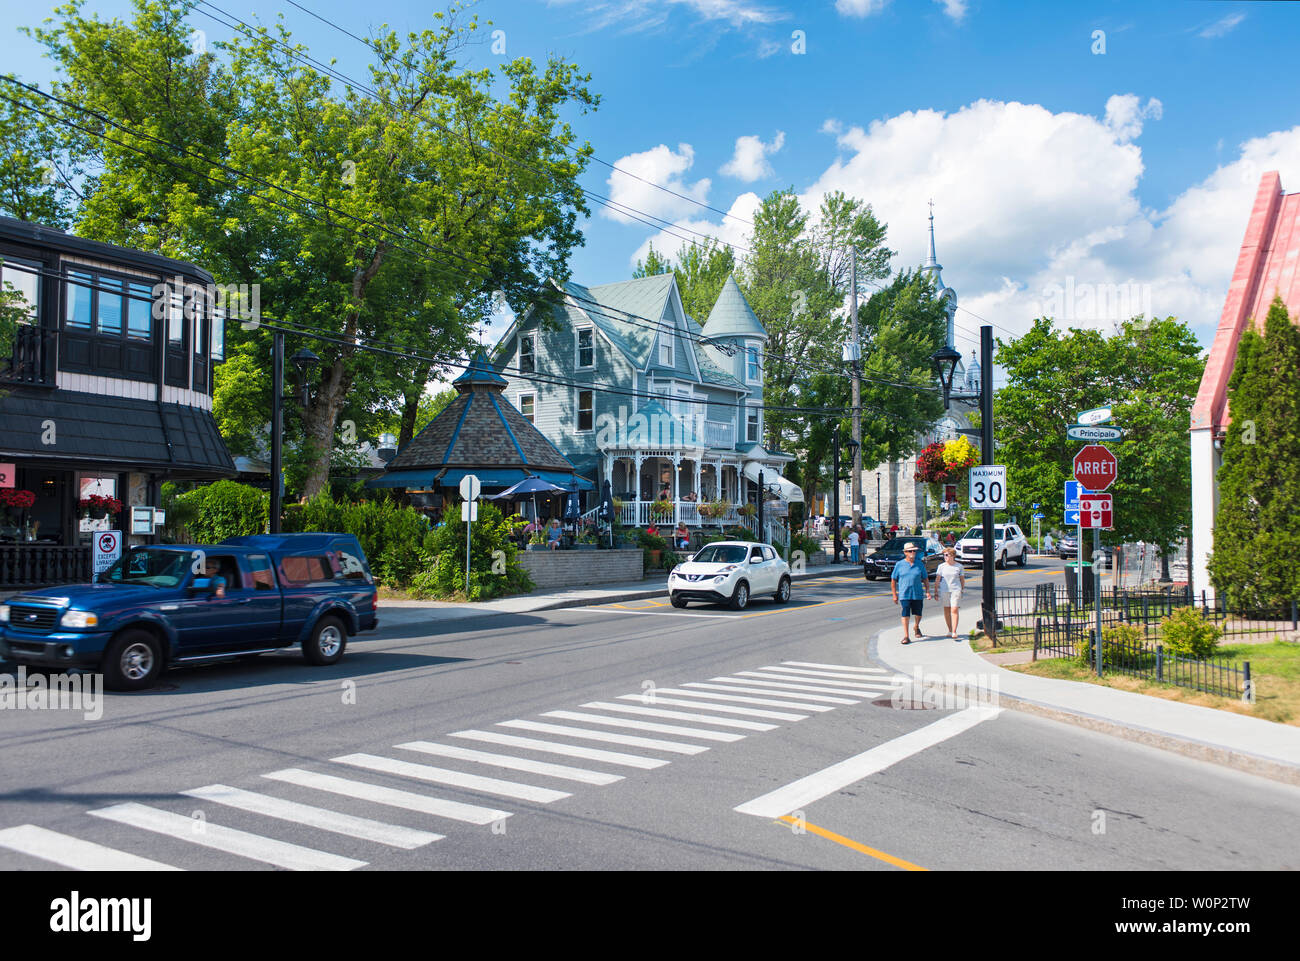 The intersection of Gare and Pricipale in Saint-Sauveur-des-Monts in Quebec, Canada Stock Photo